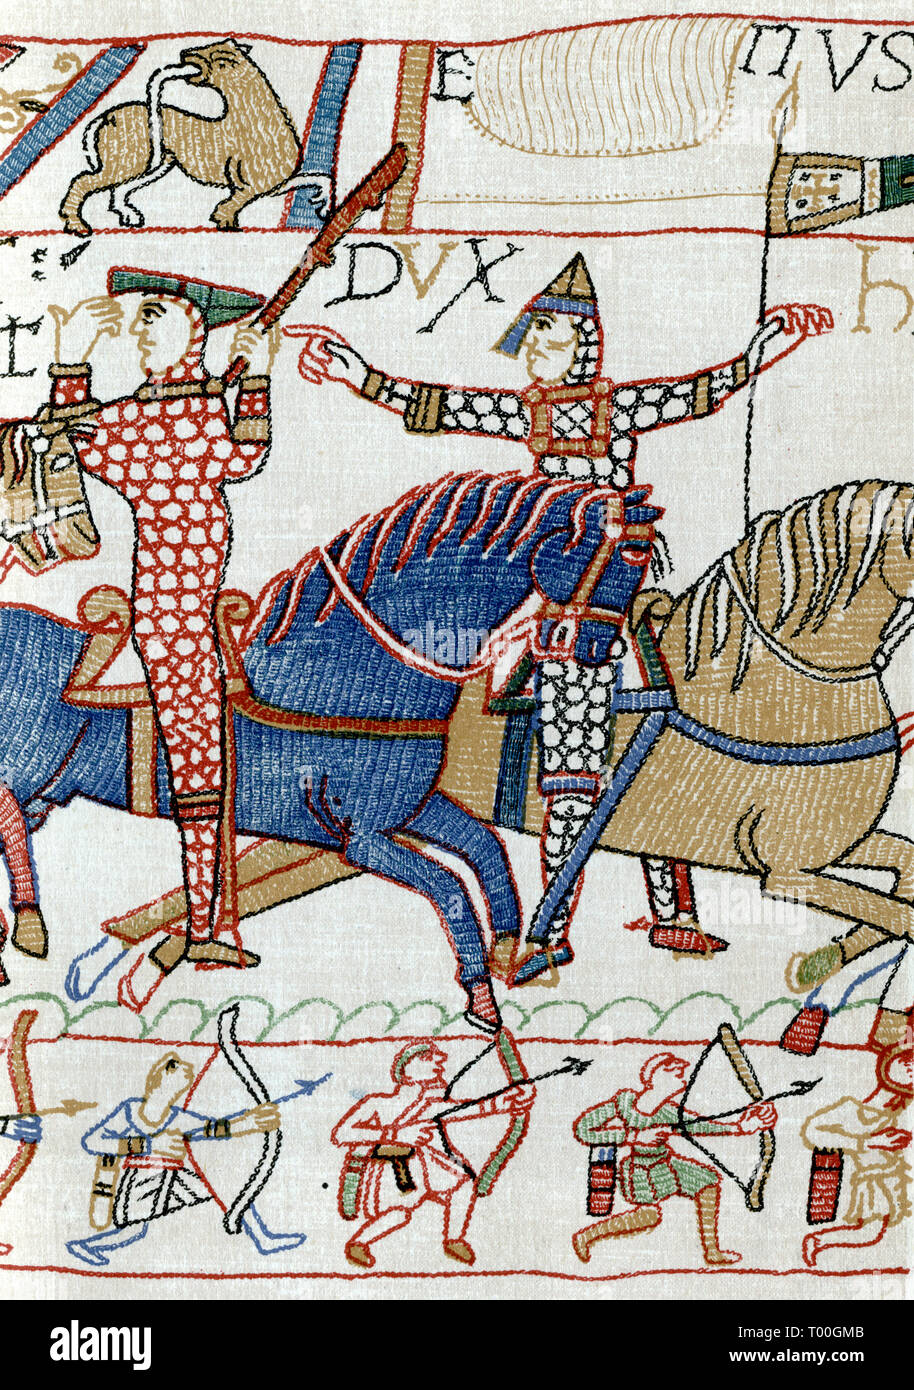 William I (c1028-1087), possibly with Eustace II, Count of Boulogne (c1015-c1087), during the Battle of Hastings, 11th century. A detail of the Bayeux Tapestry. The Bayeux Tapestry (Tapisserie de Bayeux) depicts the events leading up to the Norman conquest of England concerning William, Duke of Normandy, and Harold, Earl of Wessex, later King of England, and culminating in the Battle of Hastings. Stock Photo